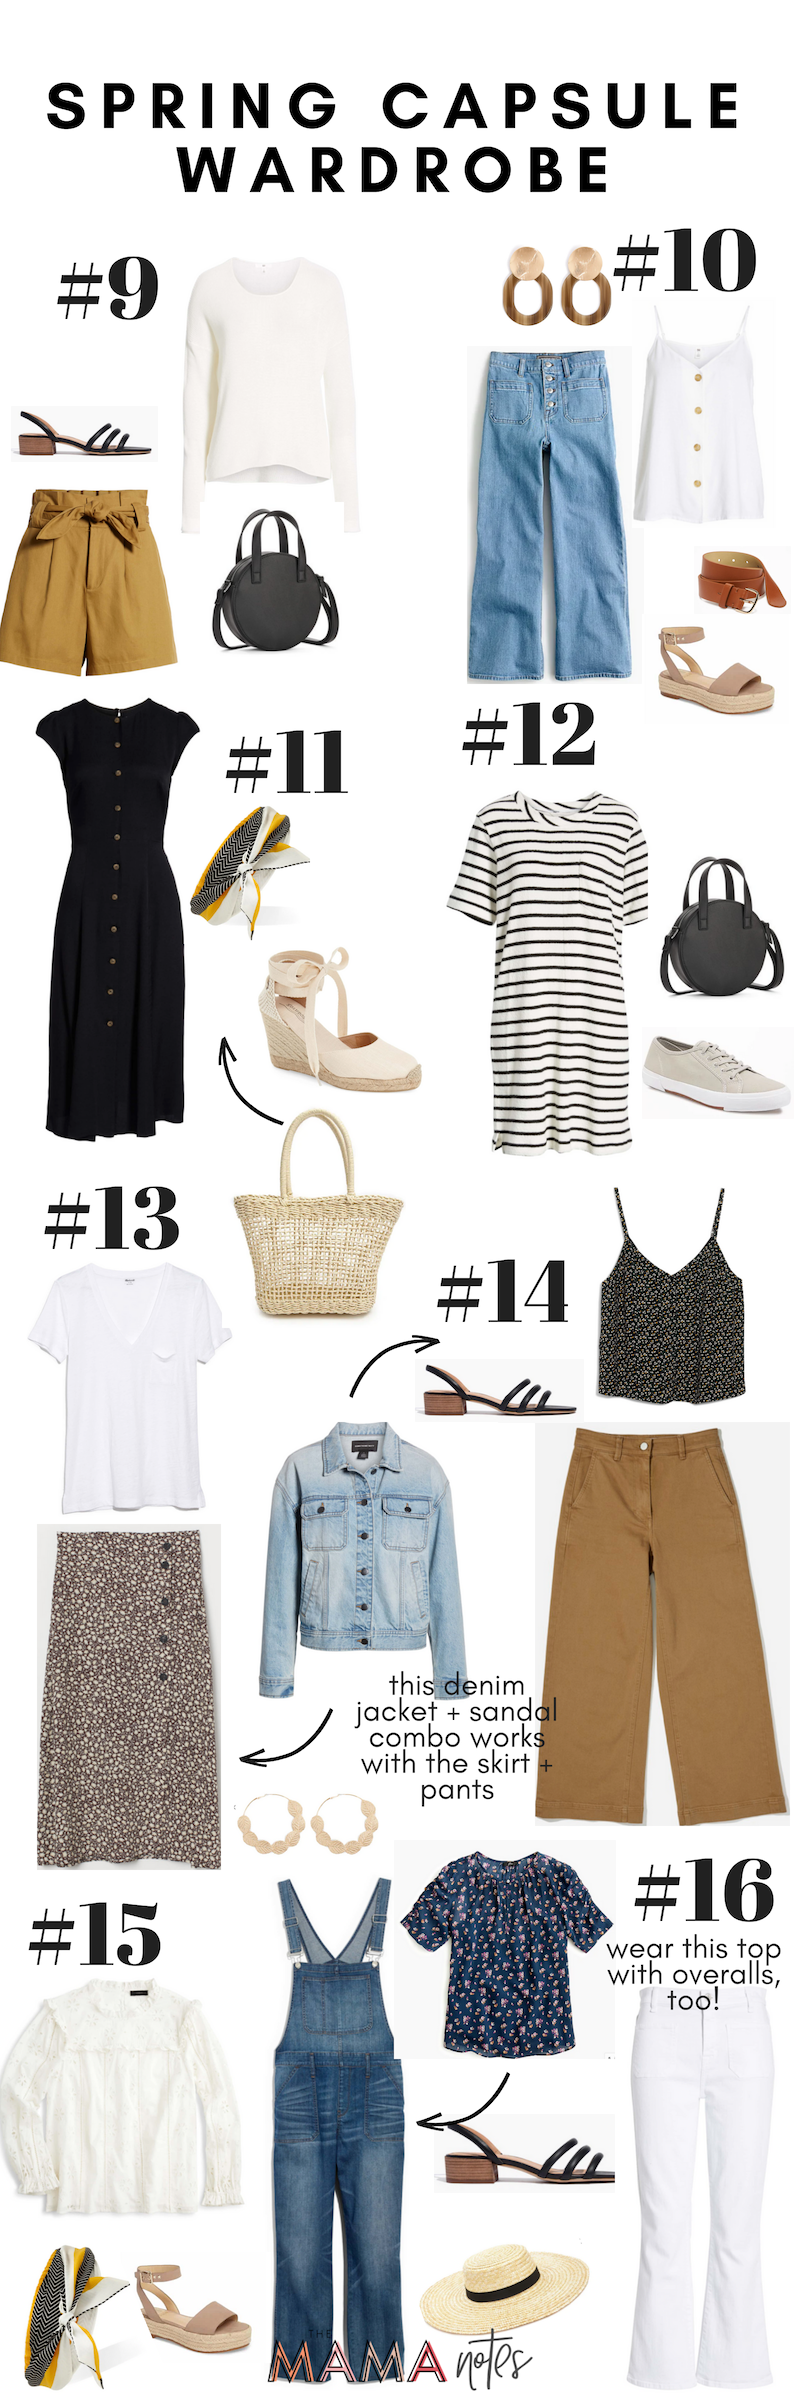 23 Spring Outfit Ideas To Mix & Match From Our Capsule Wardrobe